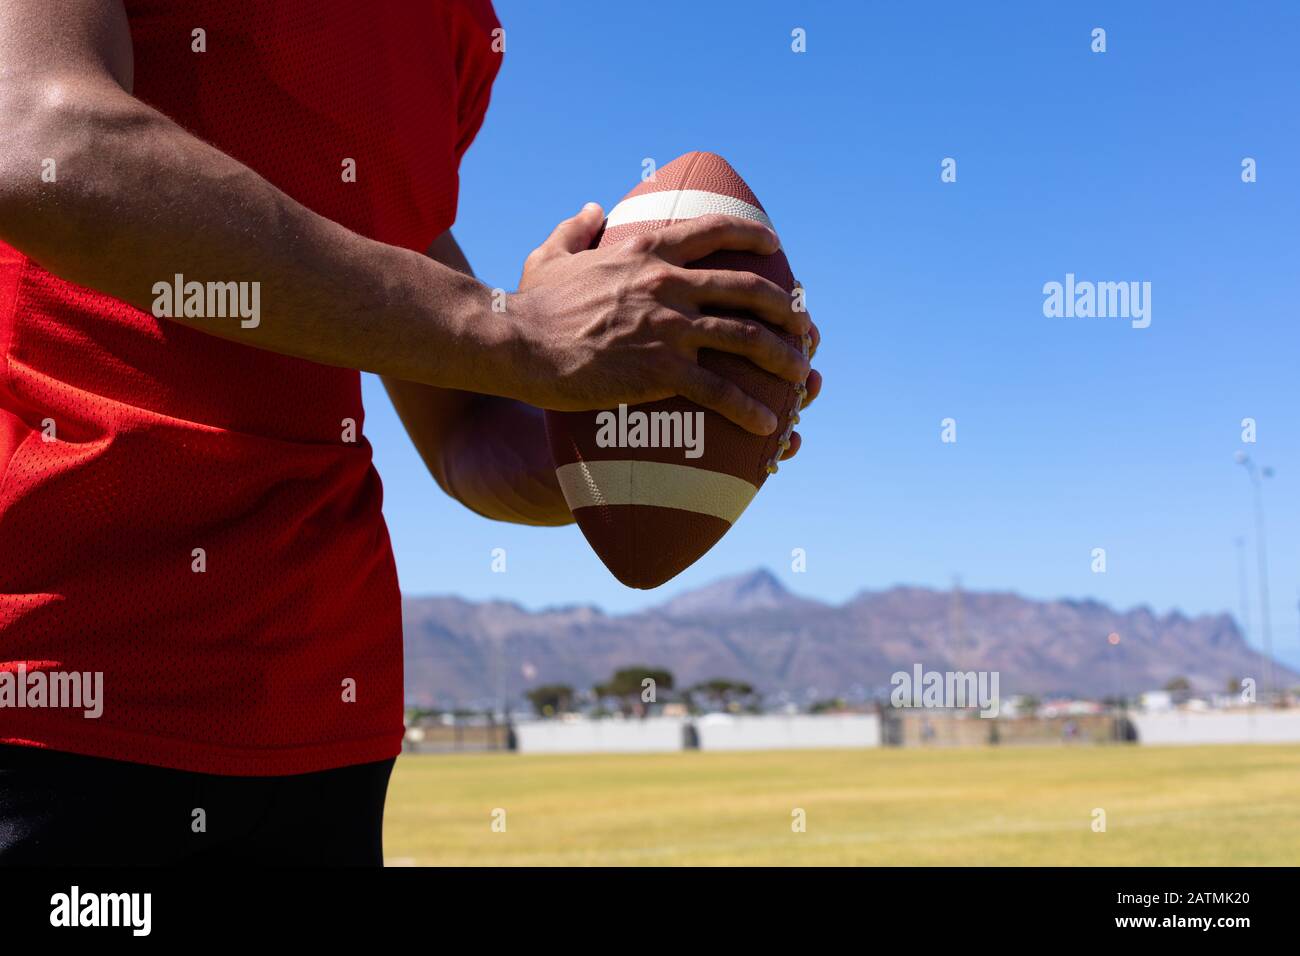 Football player with ball Stock Photo